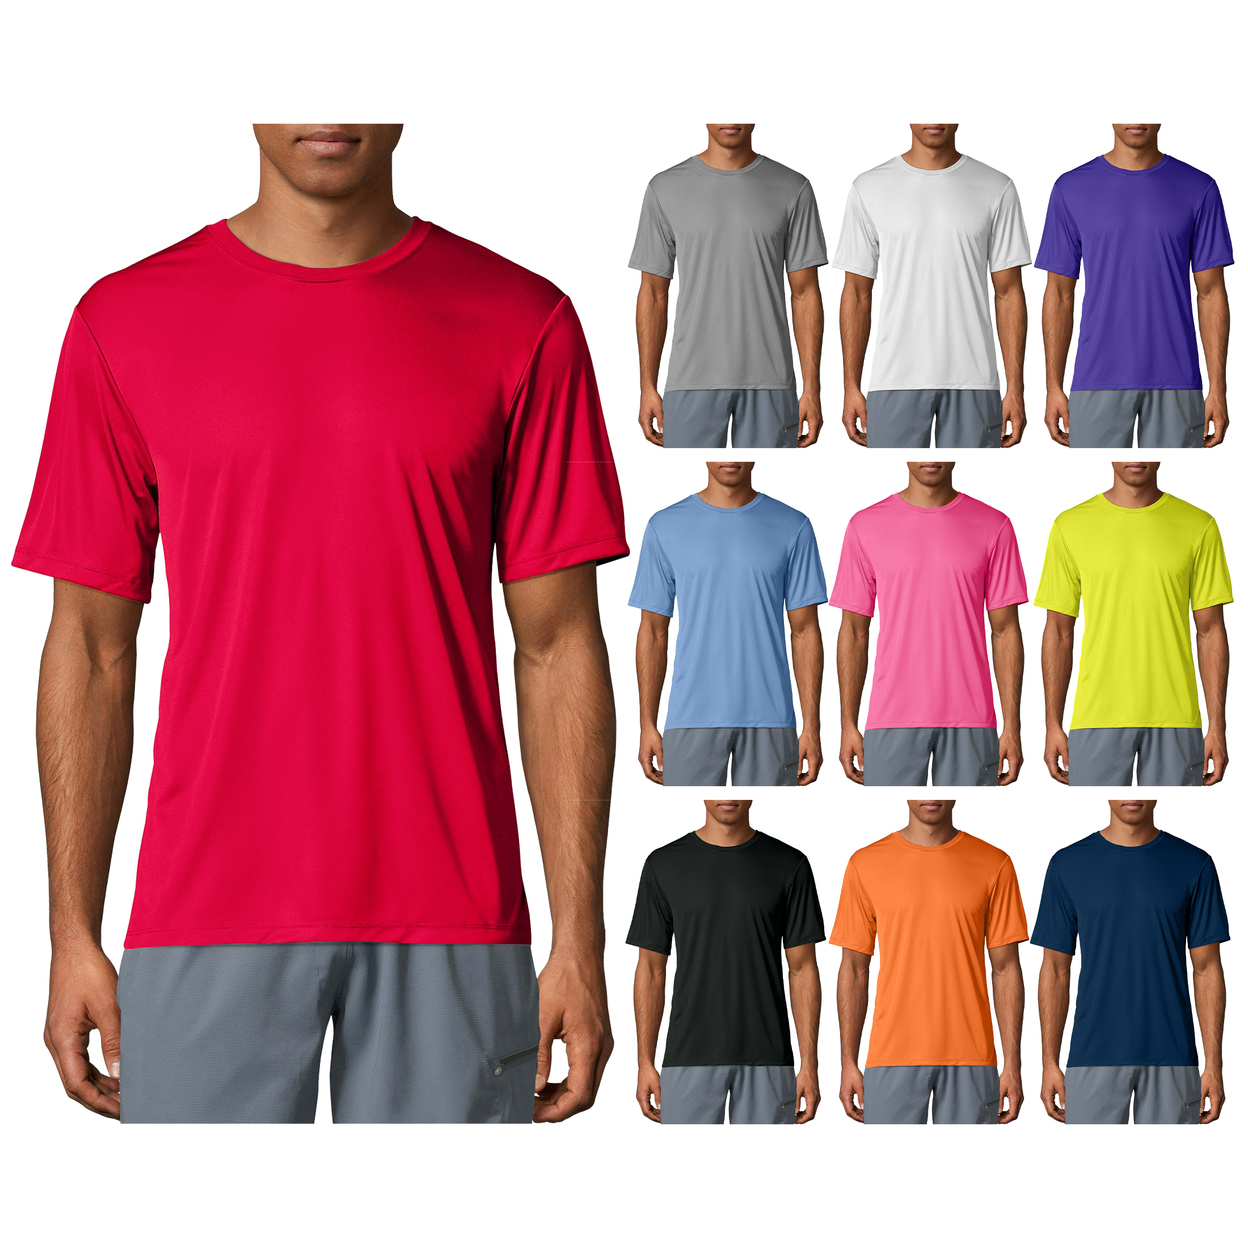 6-Pack: Men's Moisture Wicking Cool Dri-Fit Performance Short Sleeve Crew Neck T-Shirts - Small